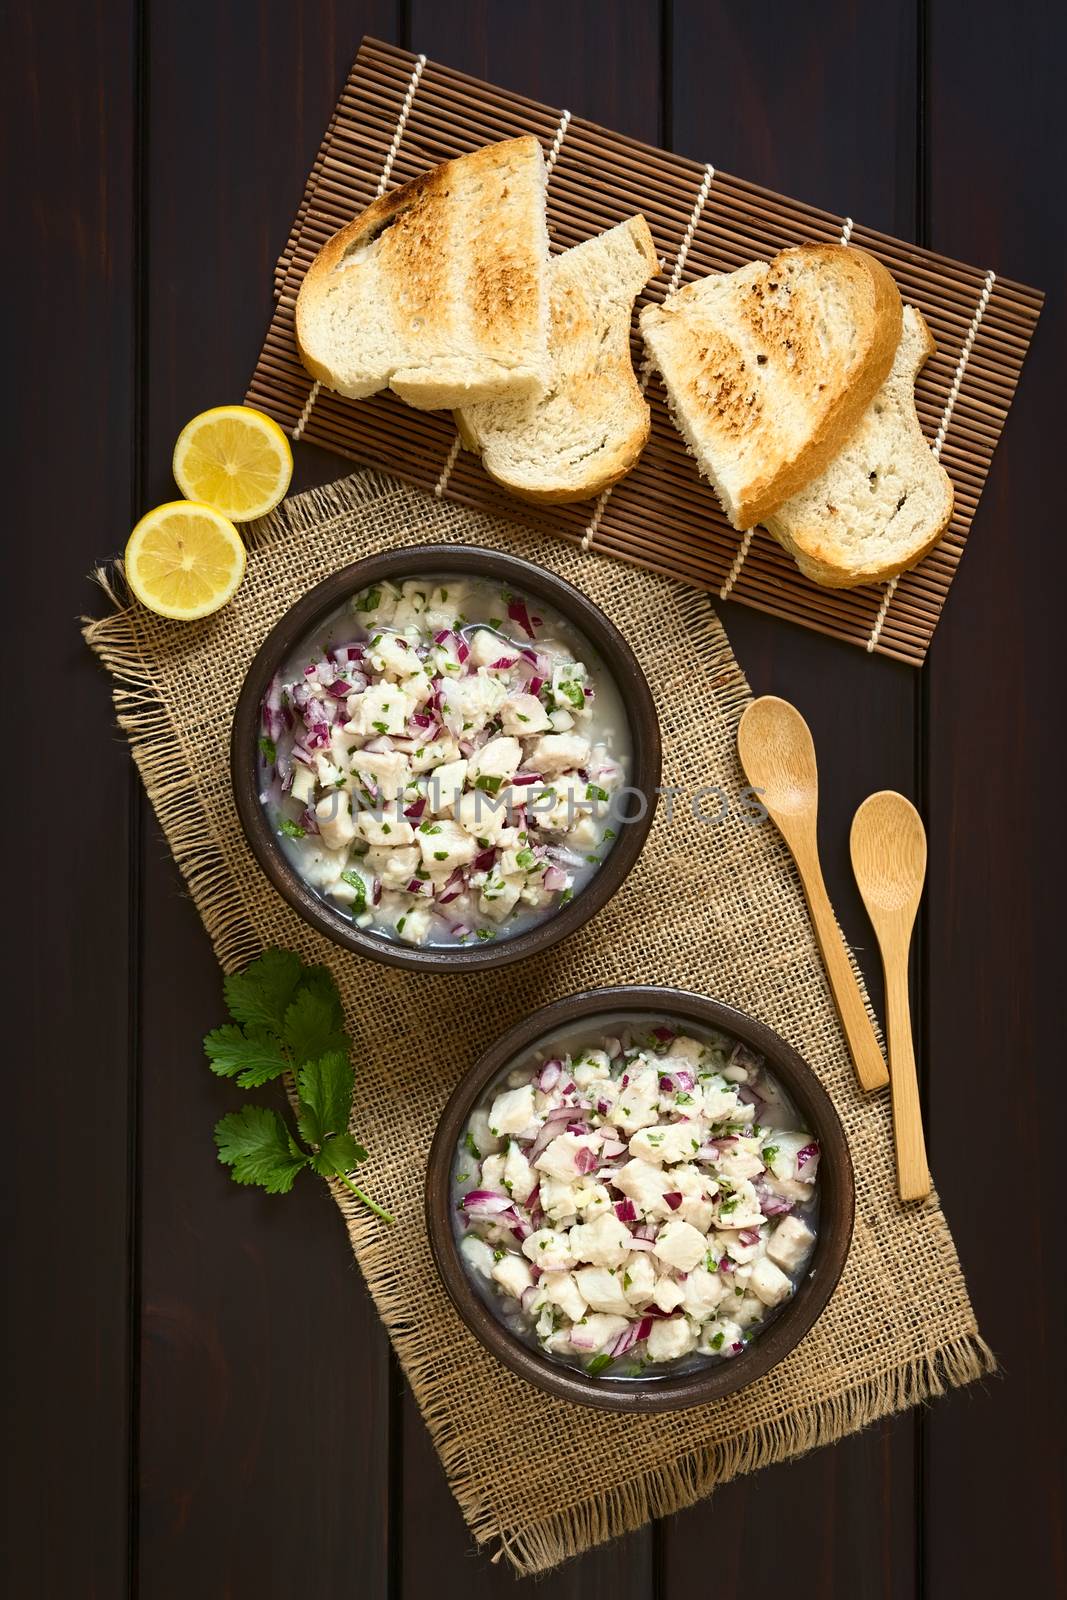 Chilean Ceviche made of Southern Ray's bream fish (lat. Brama Australis, Spanish Reineta), onion, garlic and cilantro marinated in lemon juice, accompanied by toasted bread. Photographed overhead on dark wood with natural light.